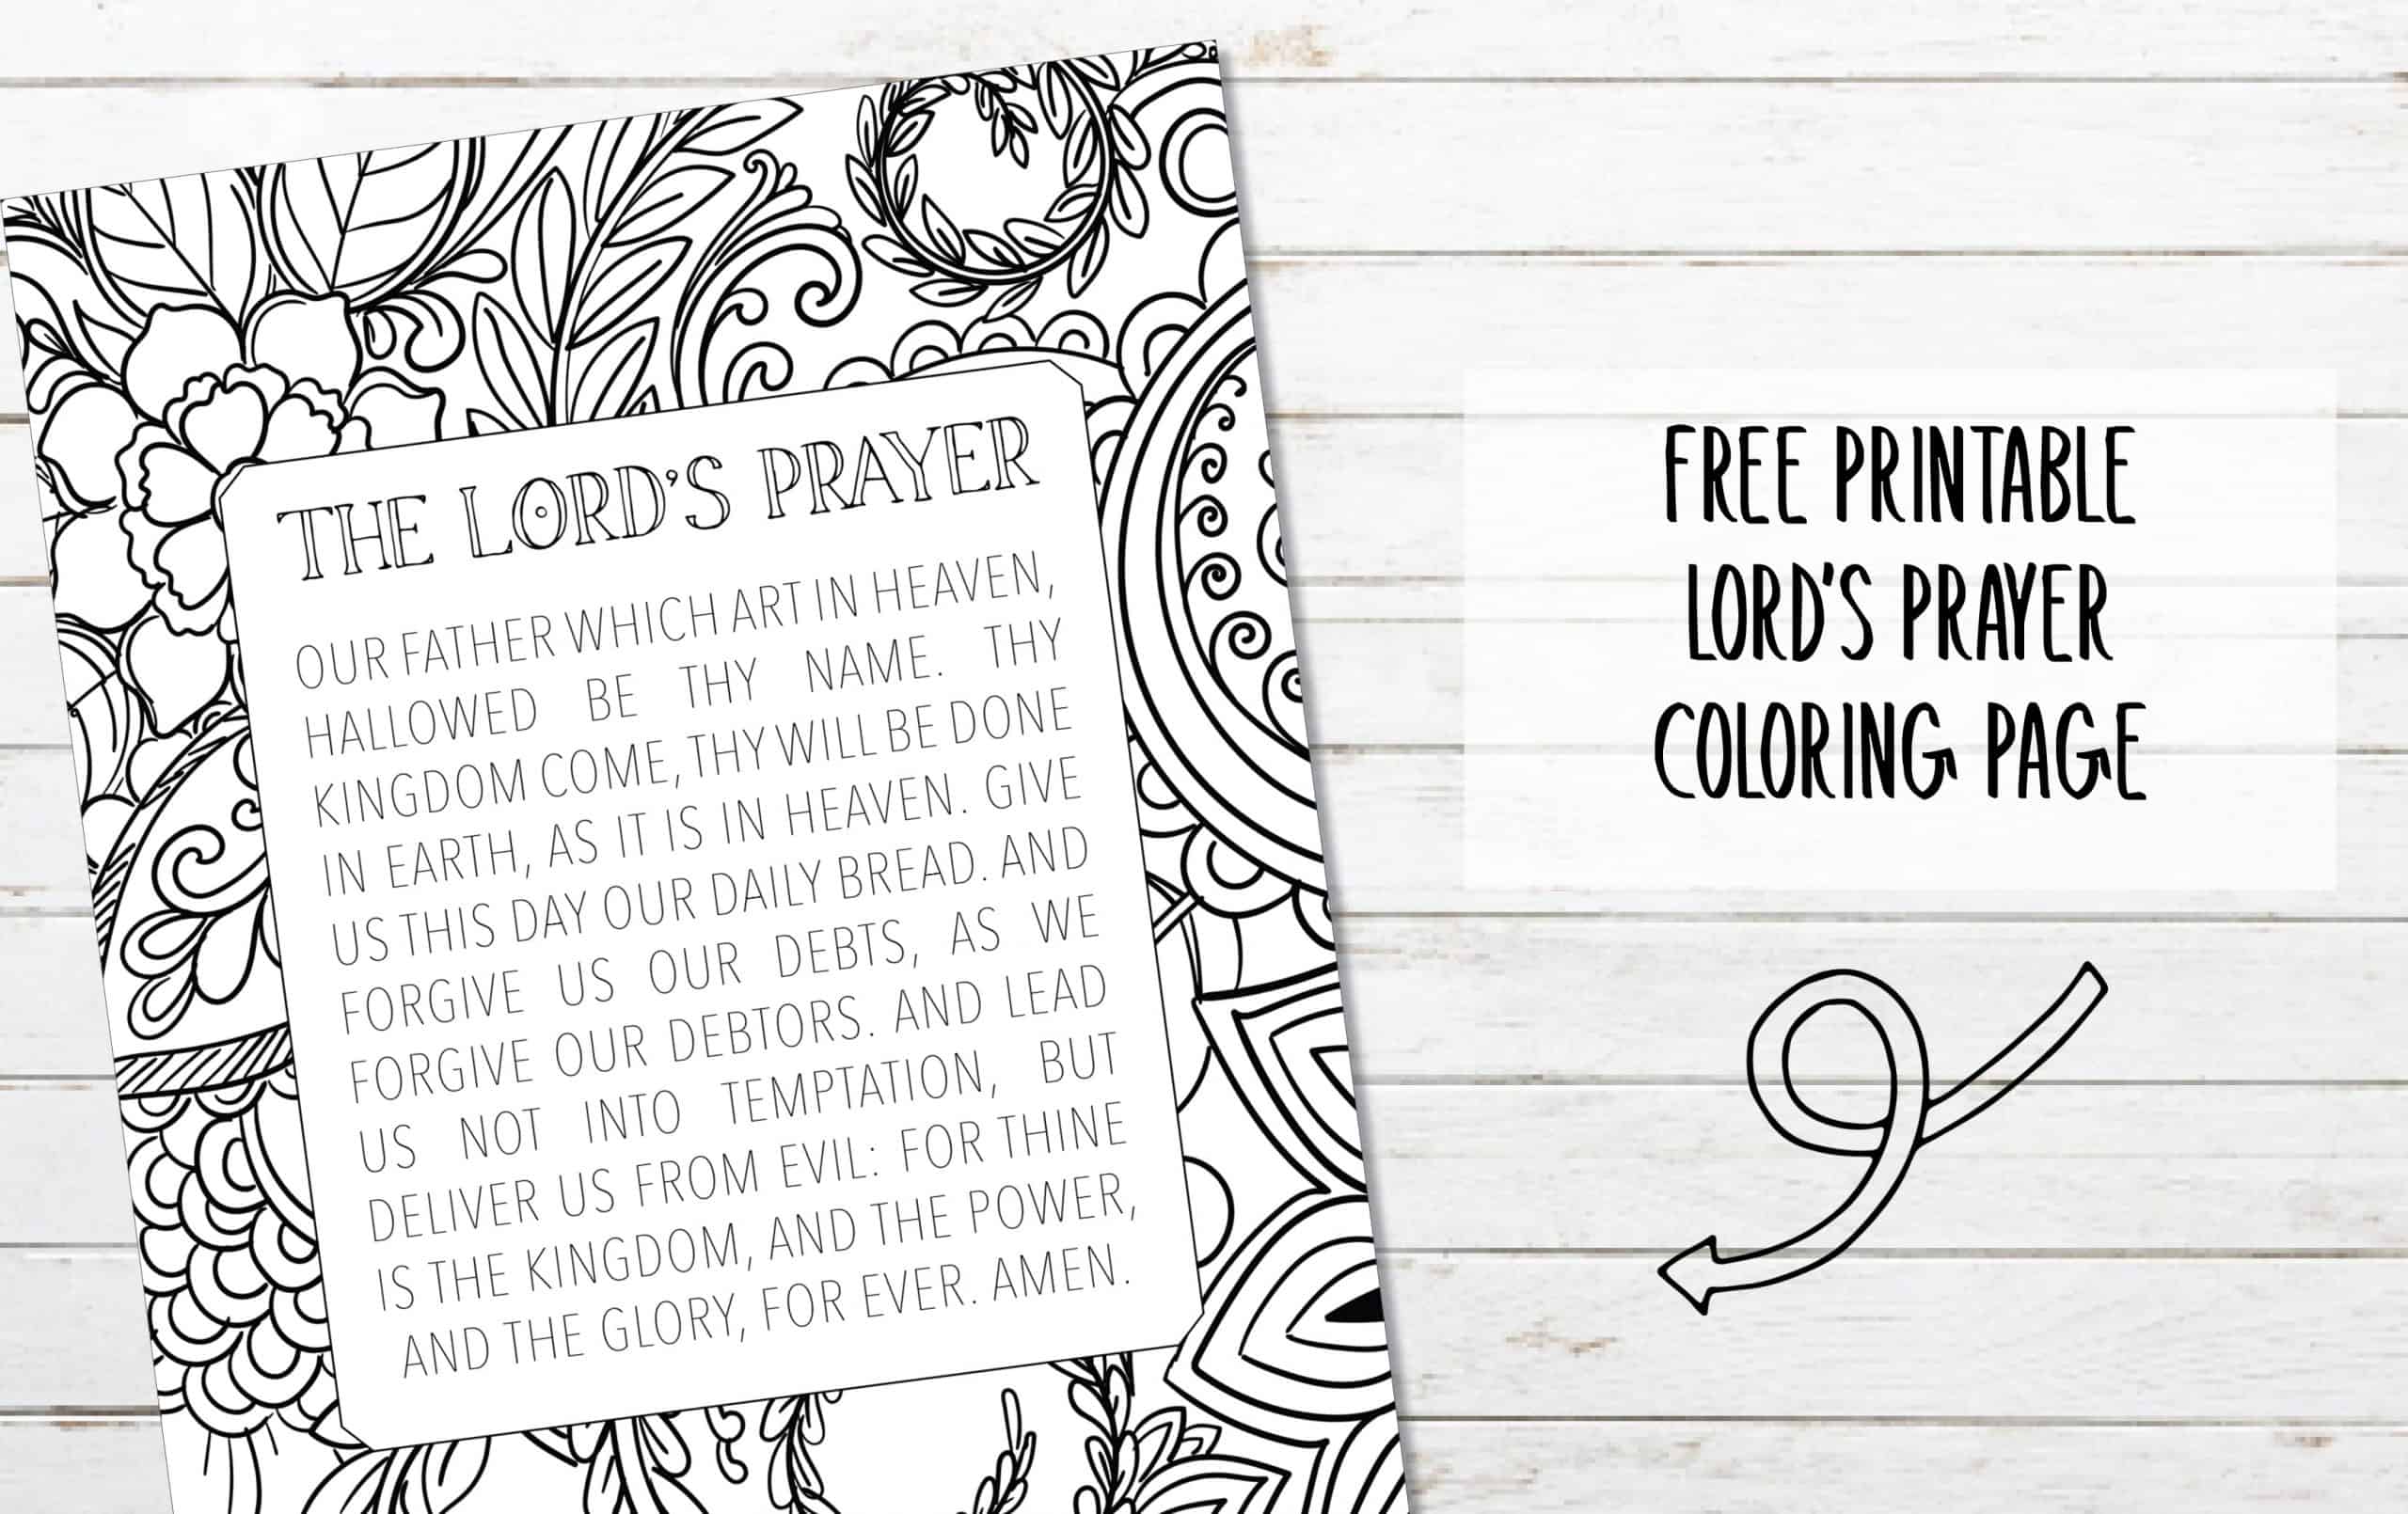 Free printable the lords prayer coloring page